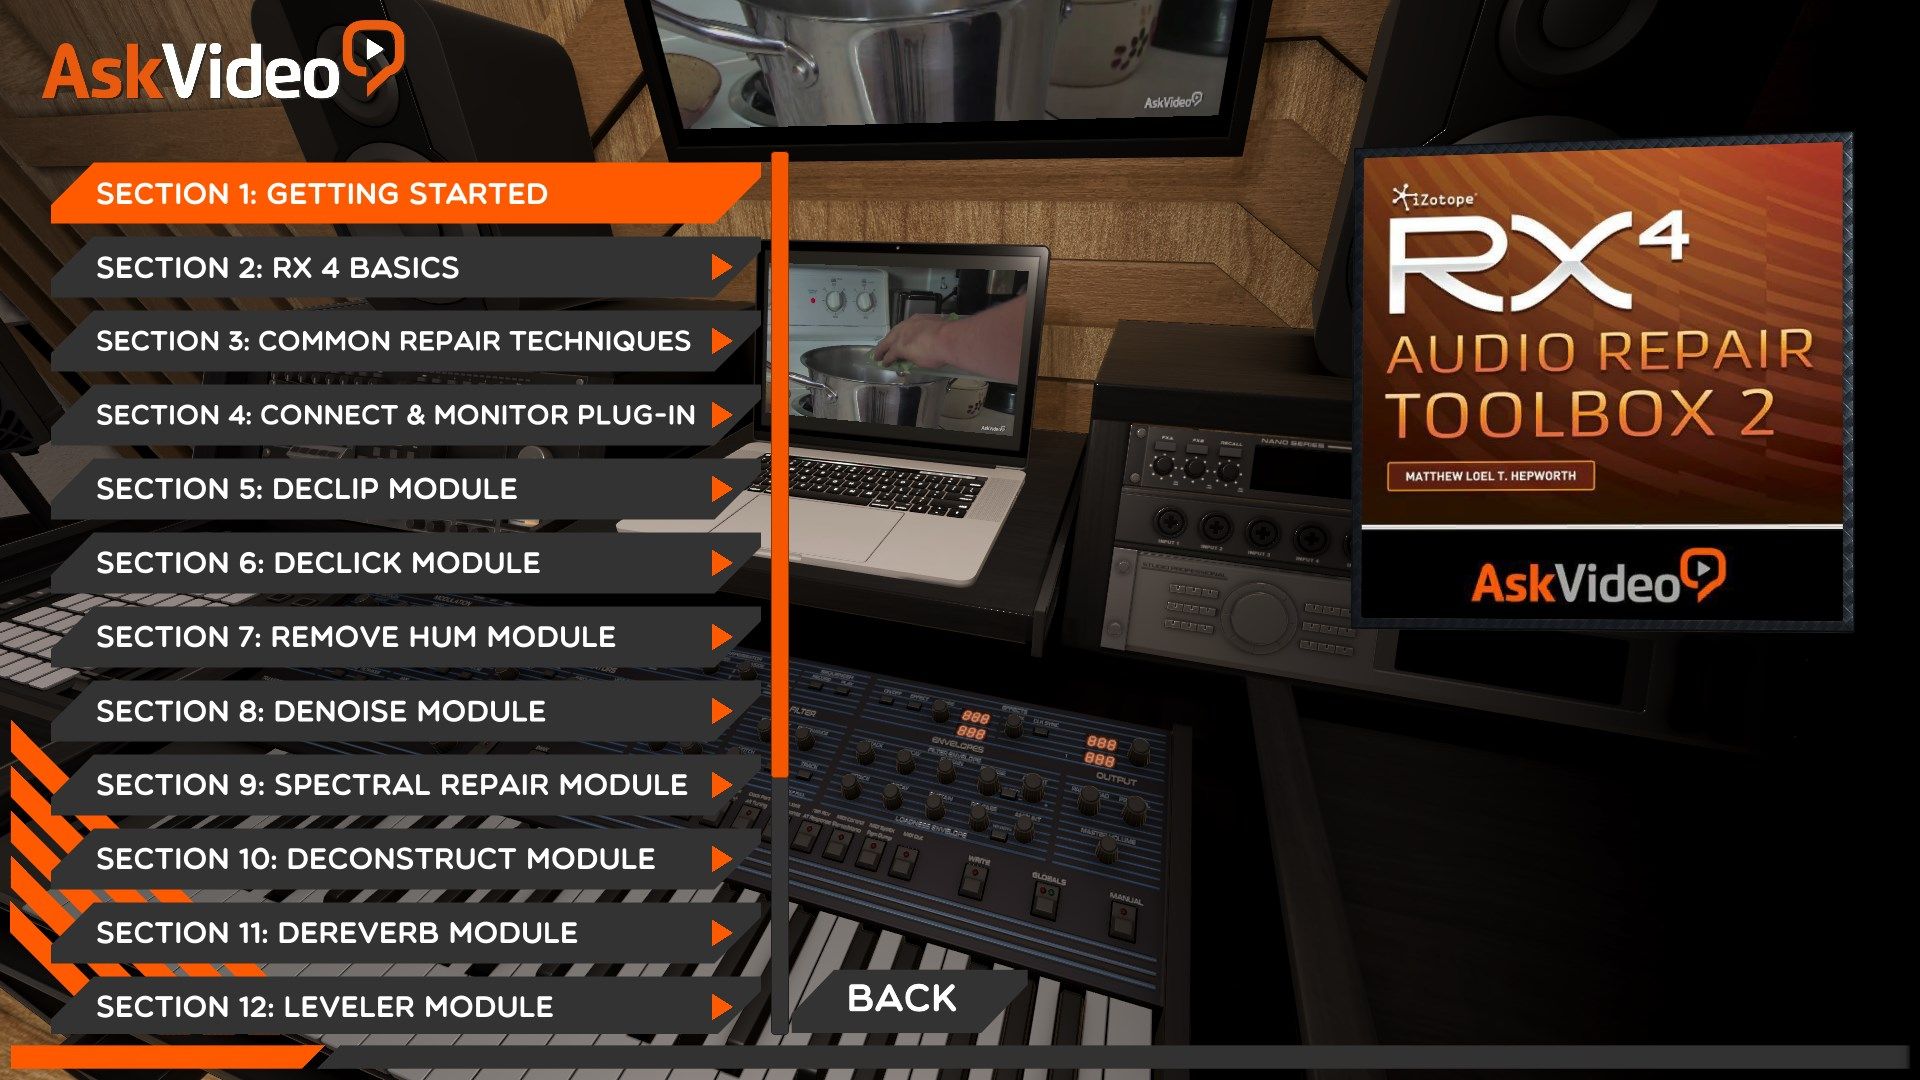 Audio Repair Toolbox 2 Course for RX4